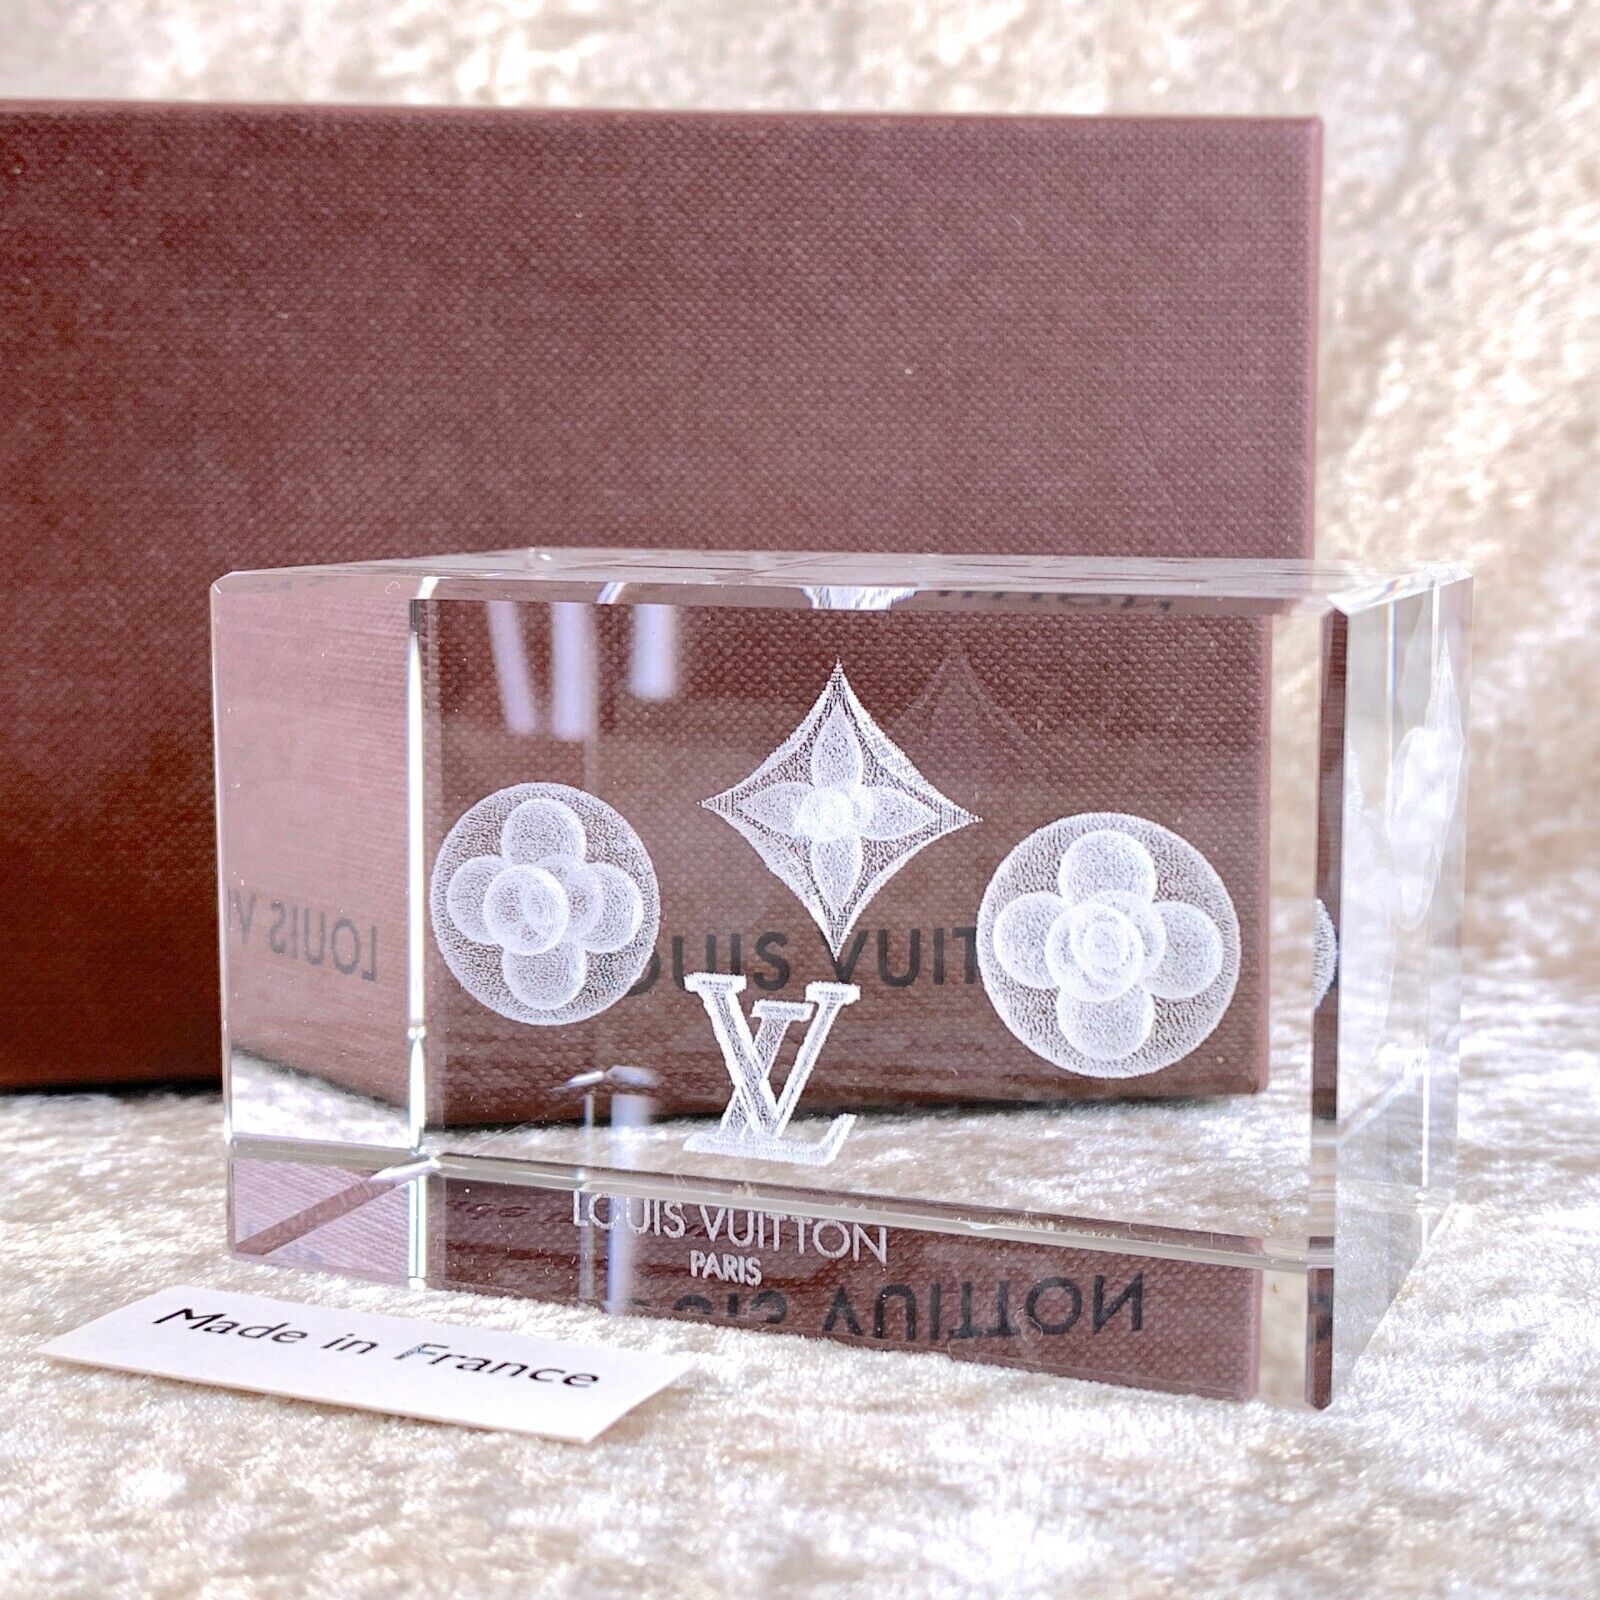 Authentic LOUIS VUITTON Monogram Crystal Paper Weight VIP Gift Item New in Box